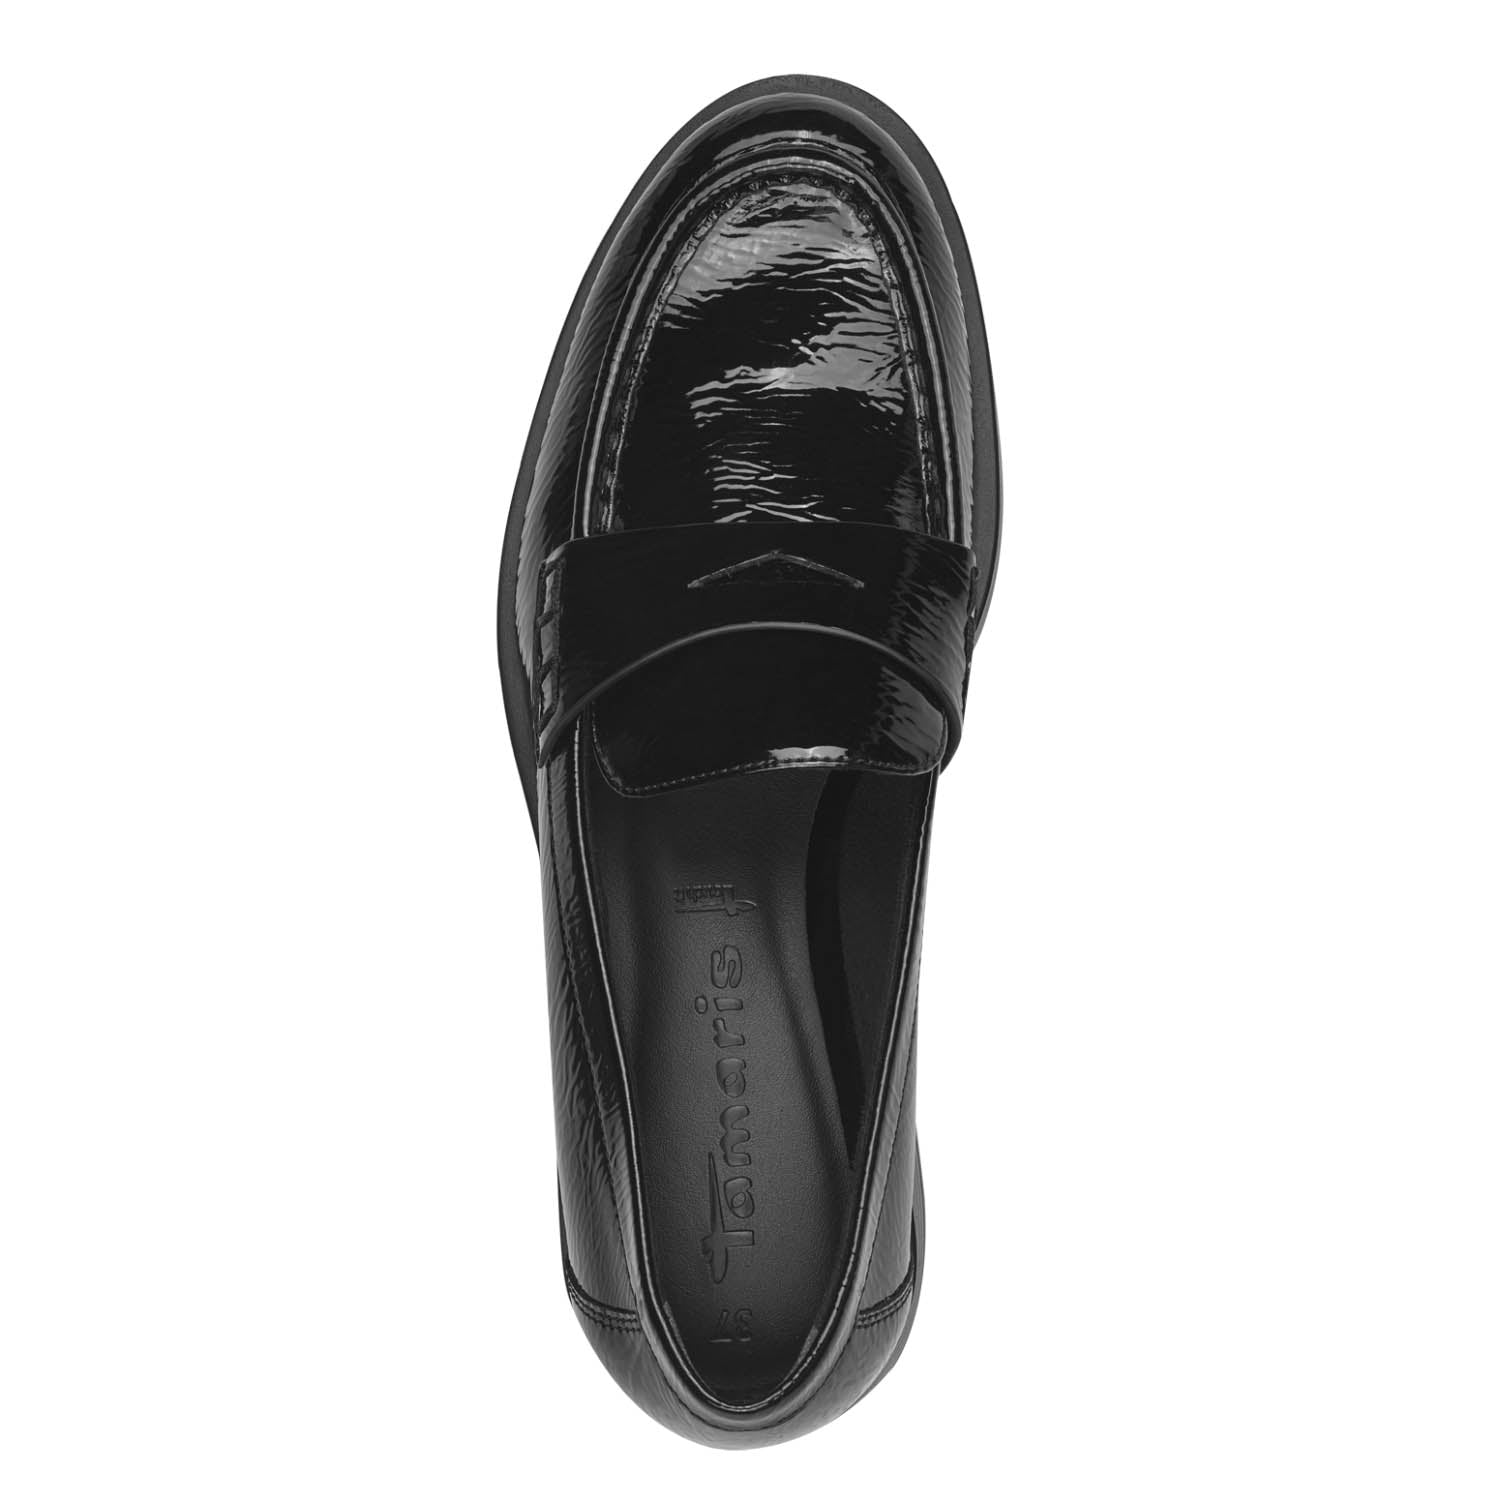 Front view of the Plain Black Patent Loafer